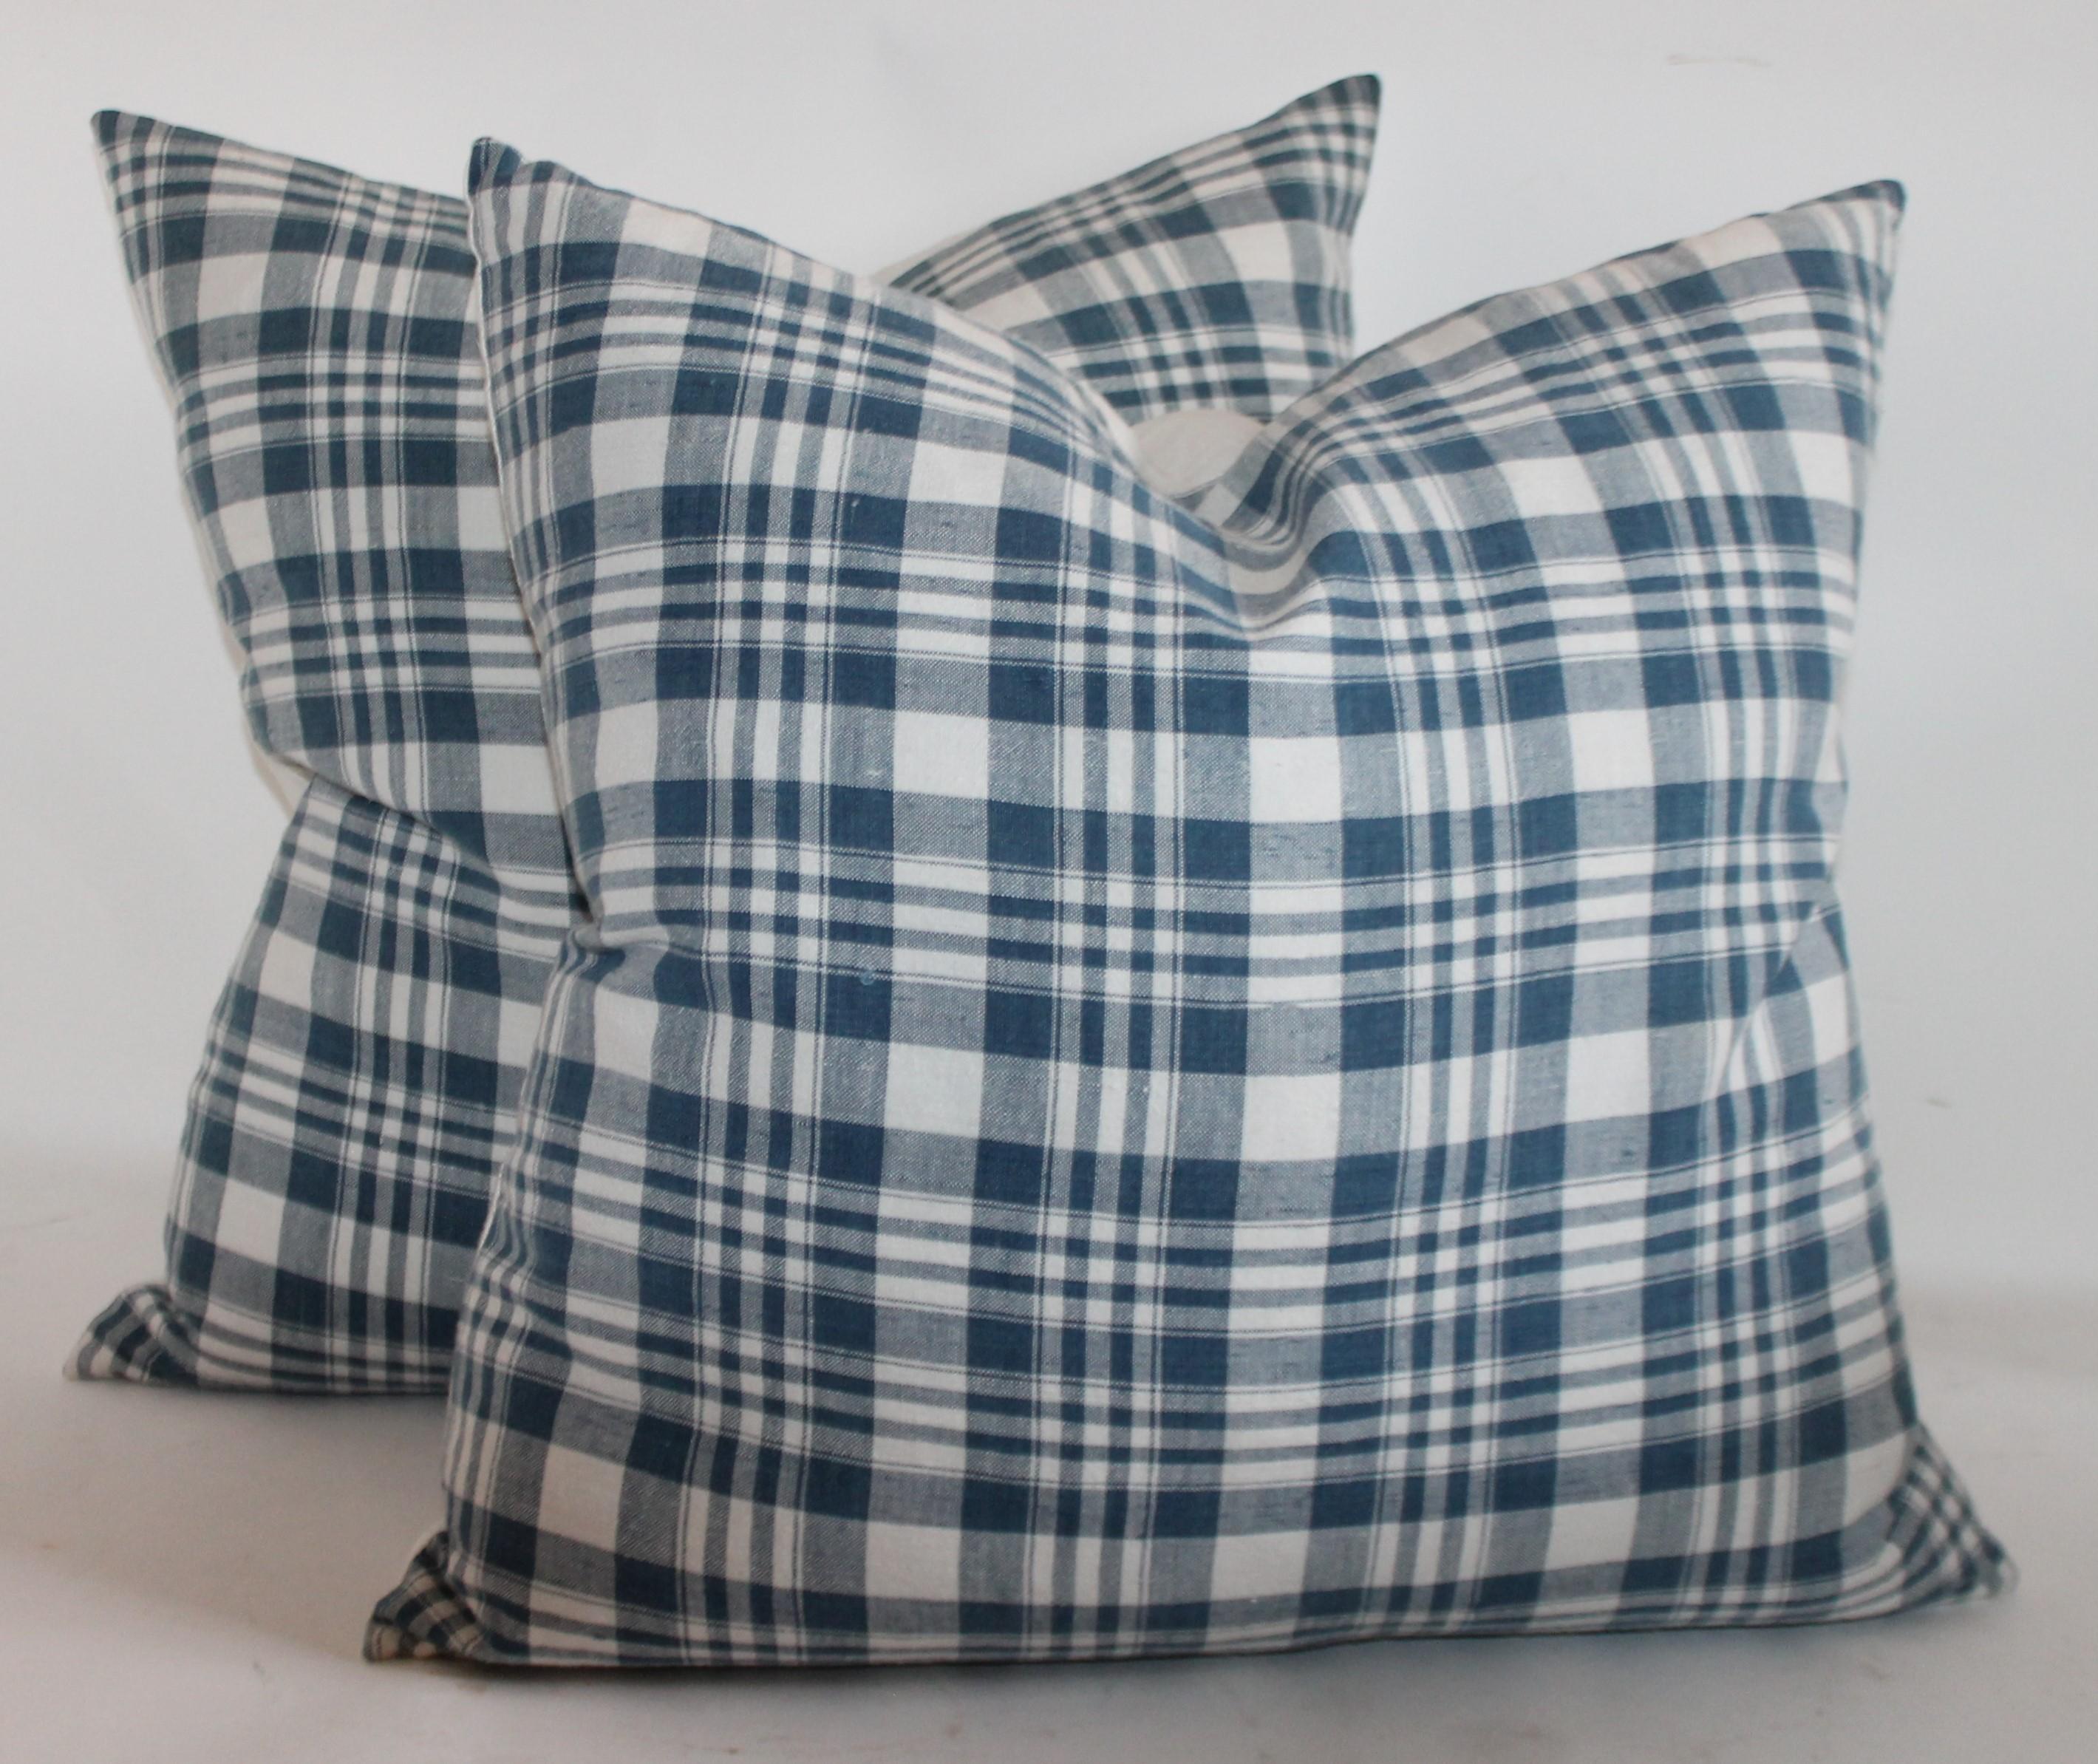 Adirondack Muted Blue & White Homespun Linen Pillows, Collection of Four Pillows For Sale